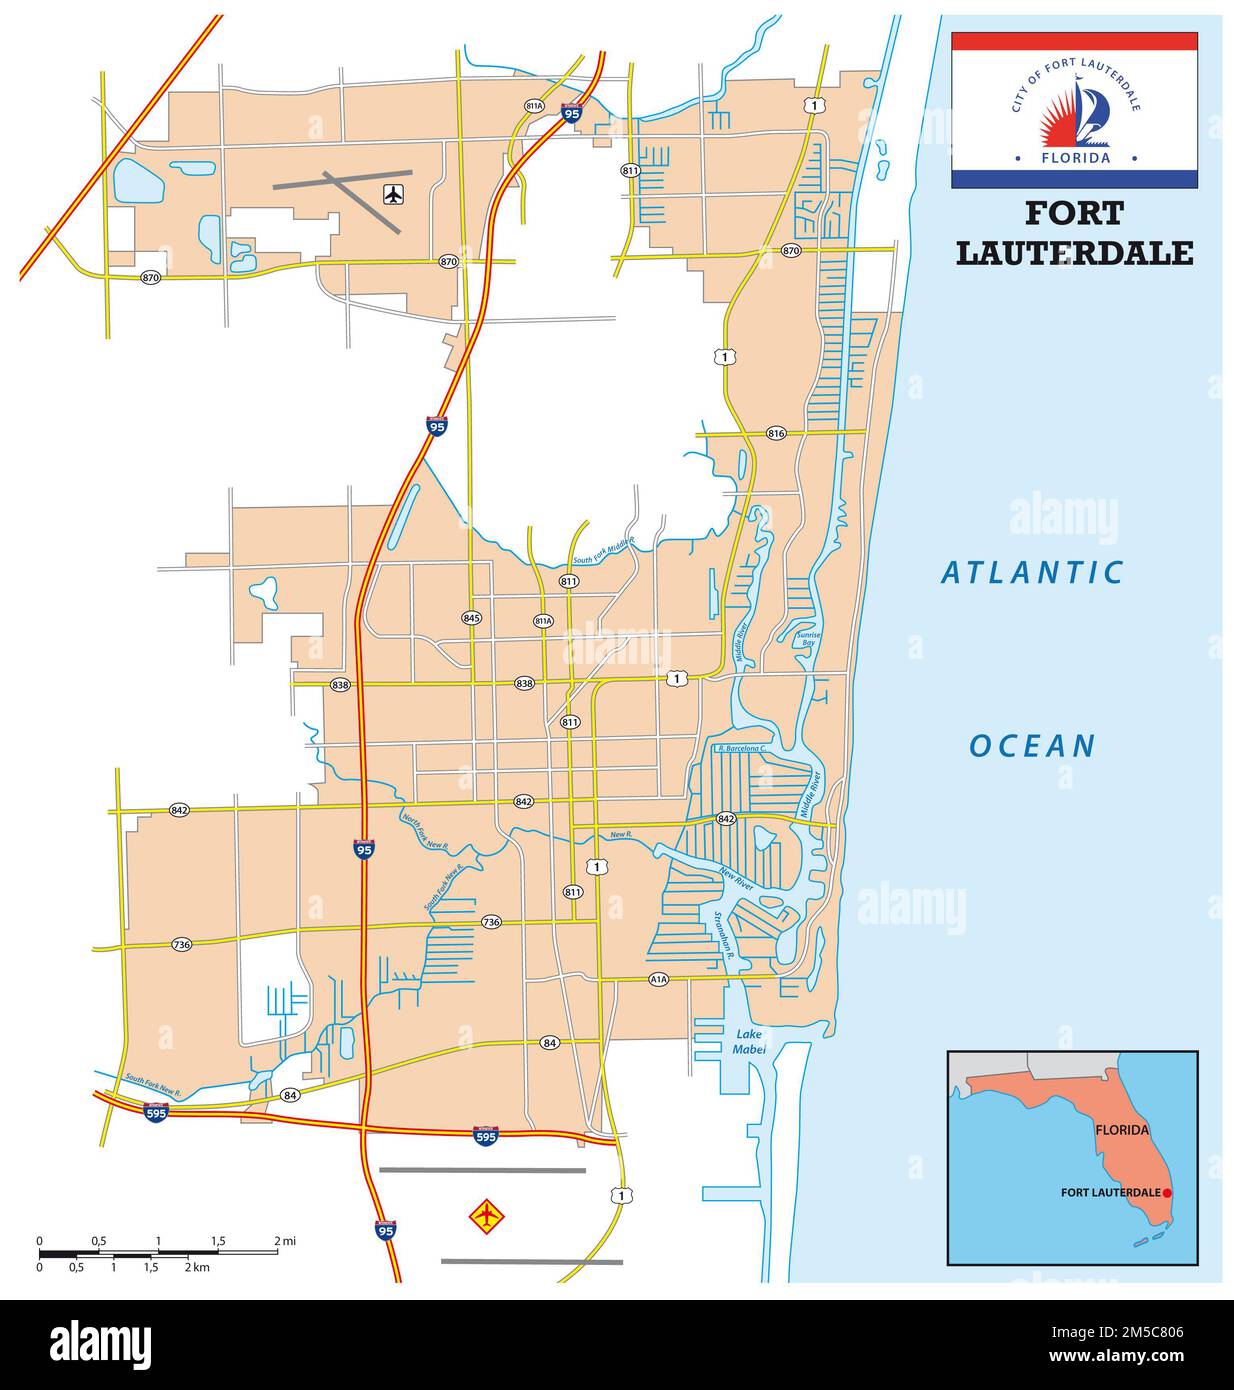 simple street map of the city of Fort Lauderdale, Florida, United States Stock Photo